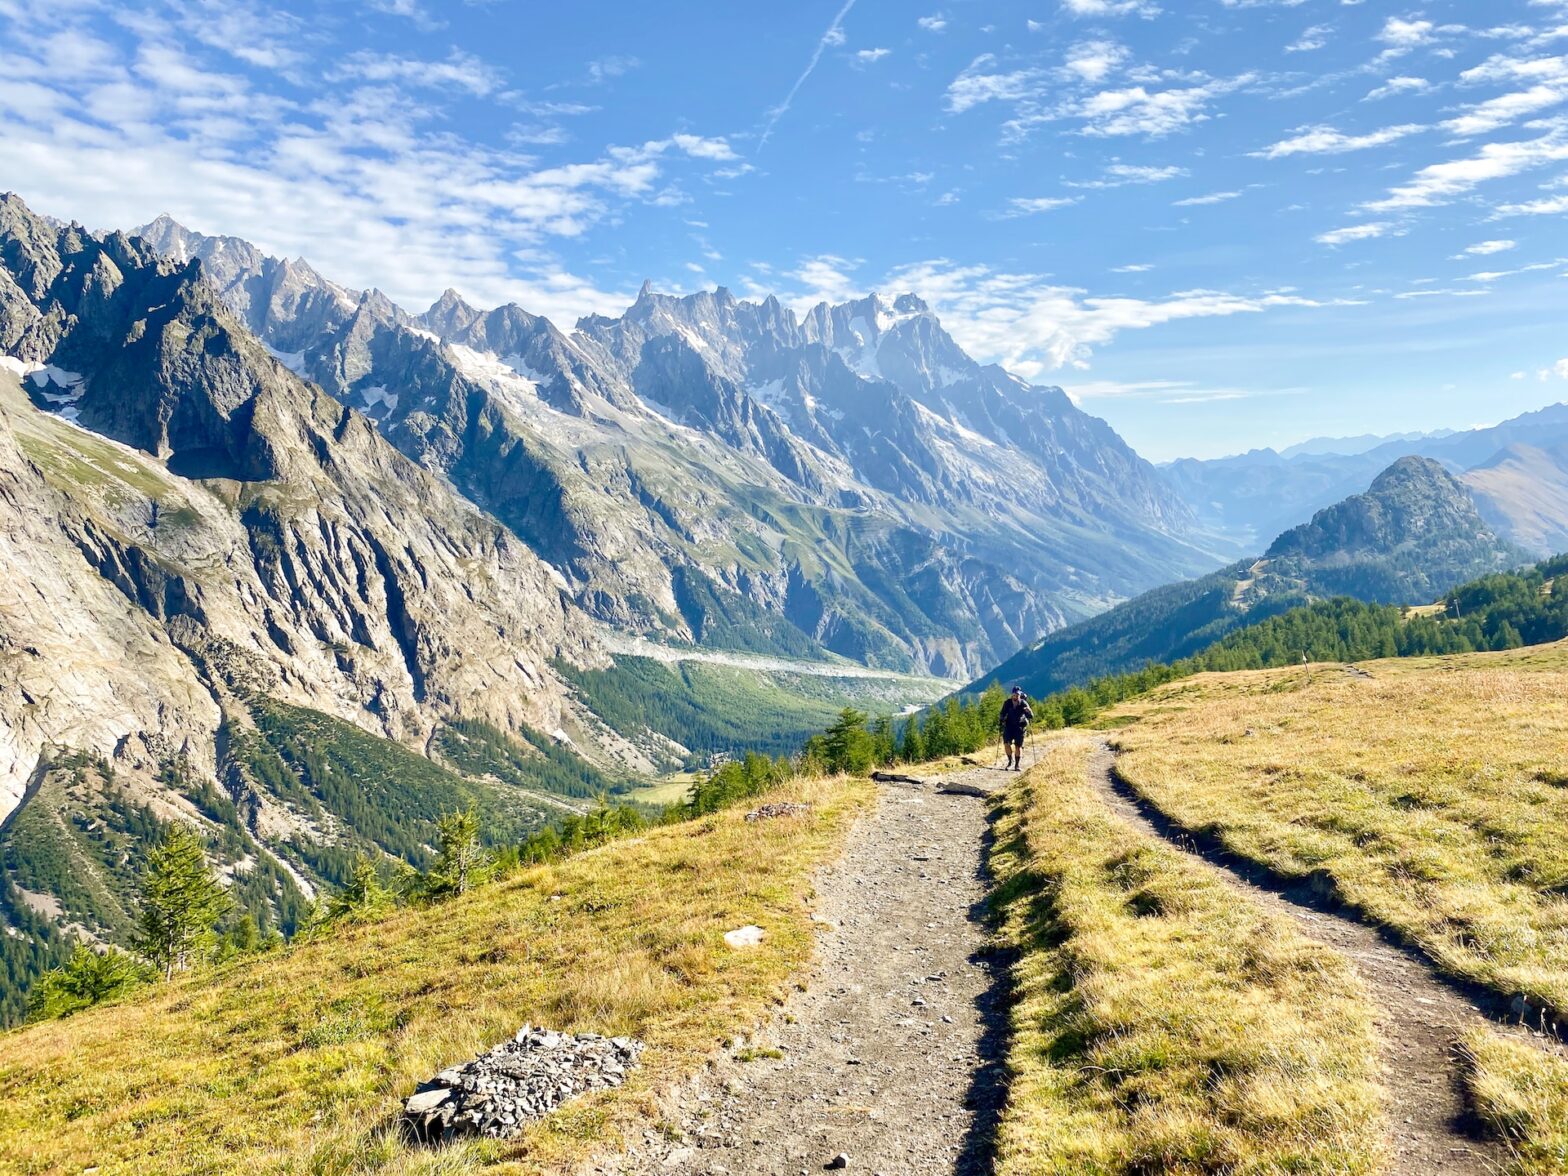 Everything You Need To Know About Hiking The Tour du Mont Blanc